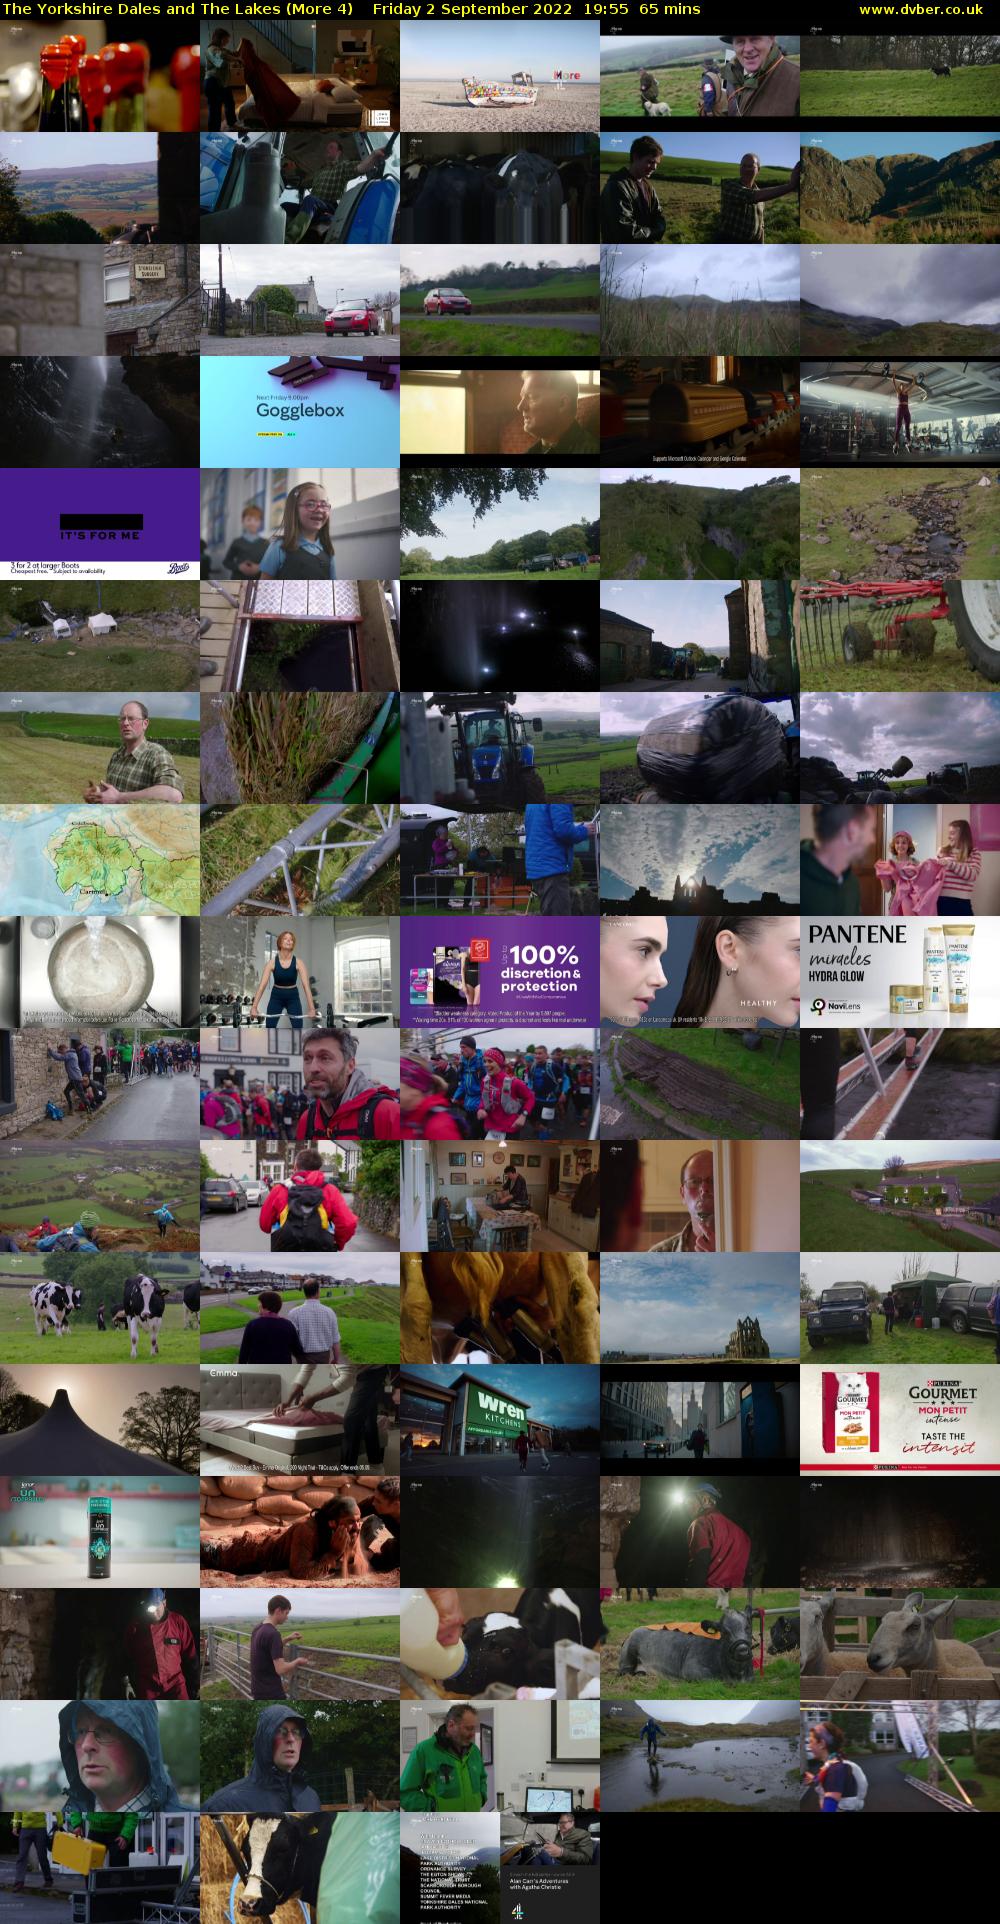 The Yorkshire Dales and The Lakes (More 4) Friday 2 September 2022 19:55 - 21:00